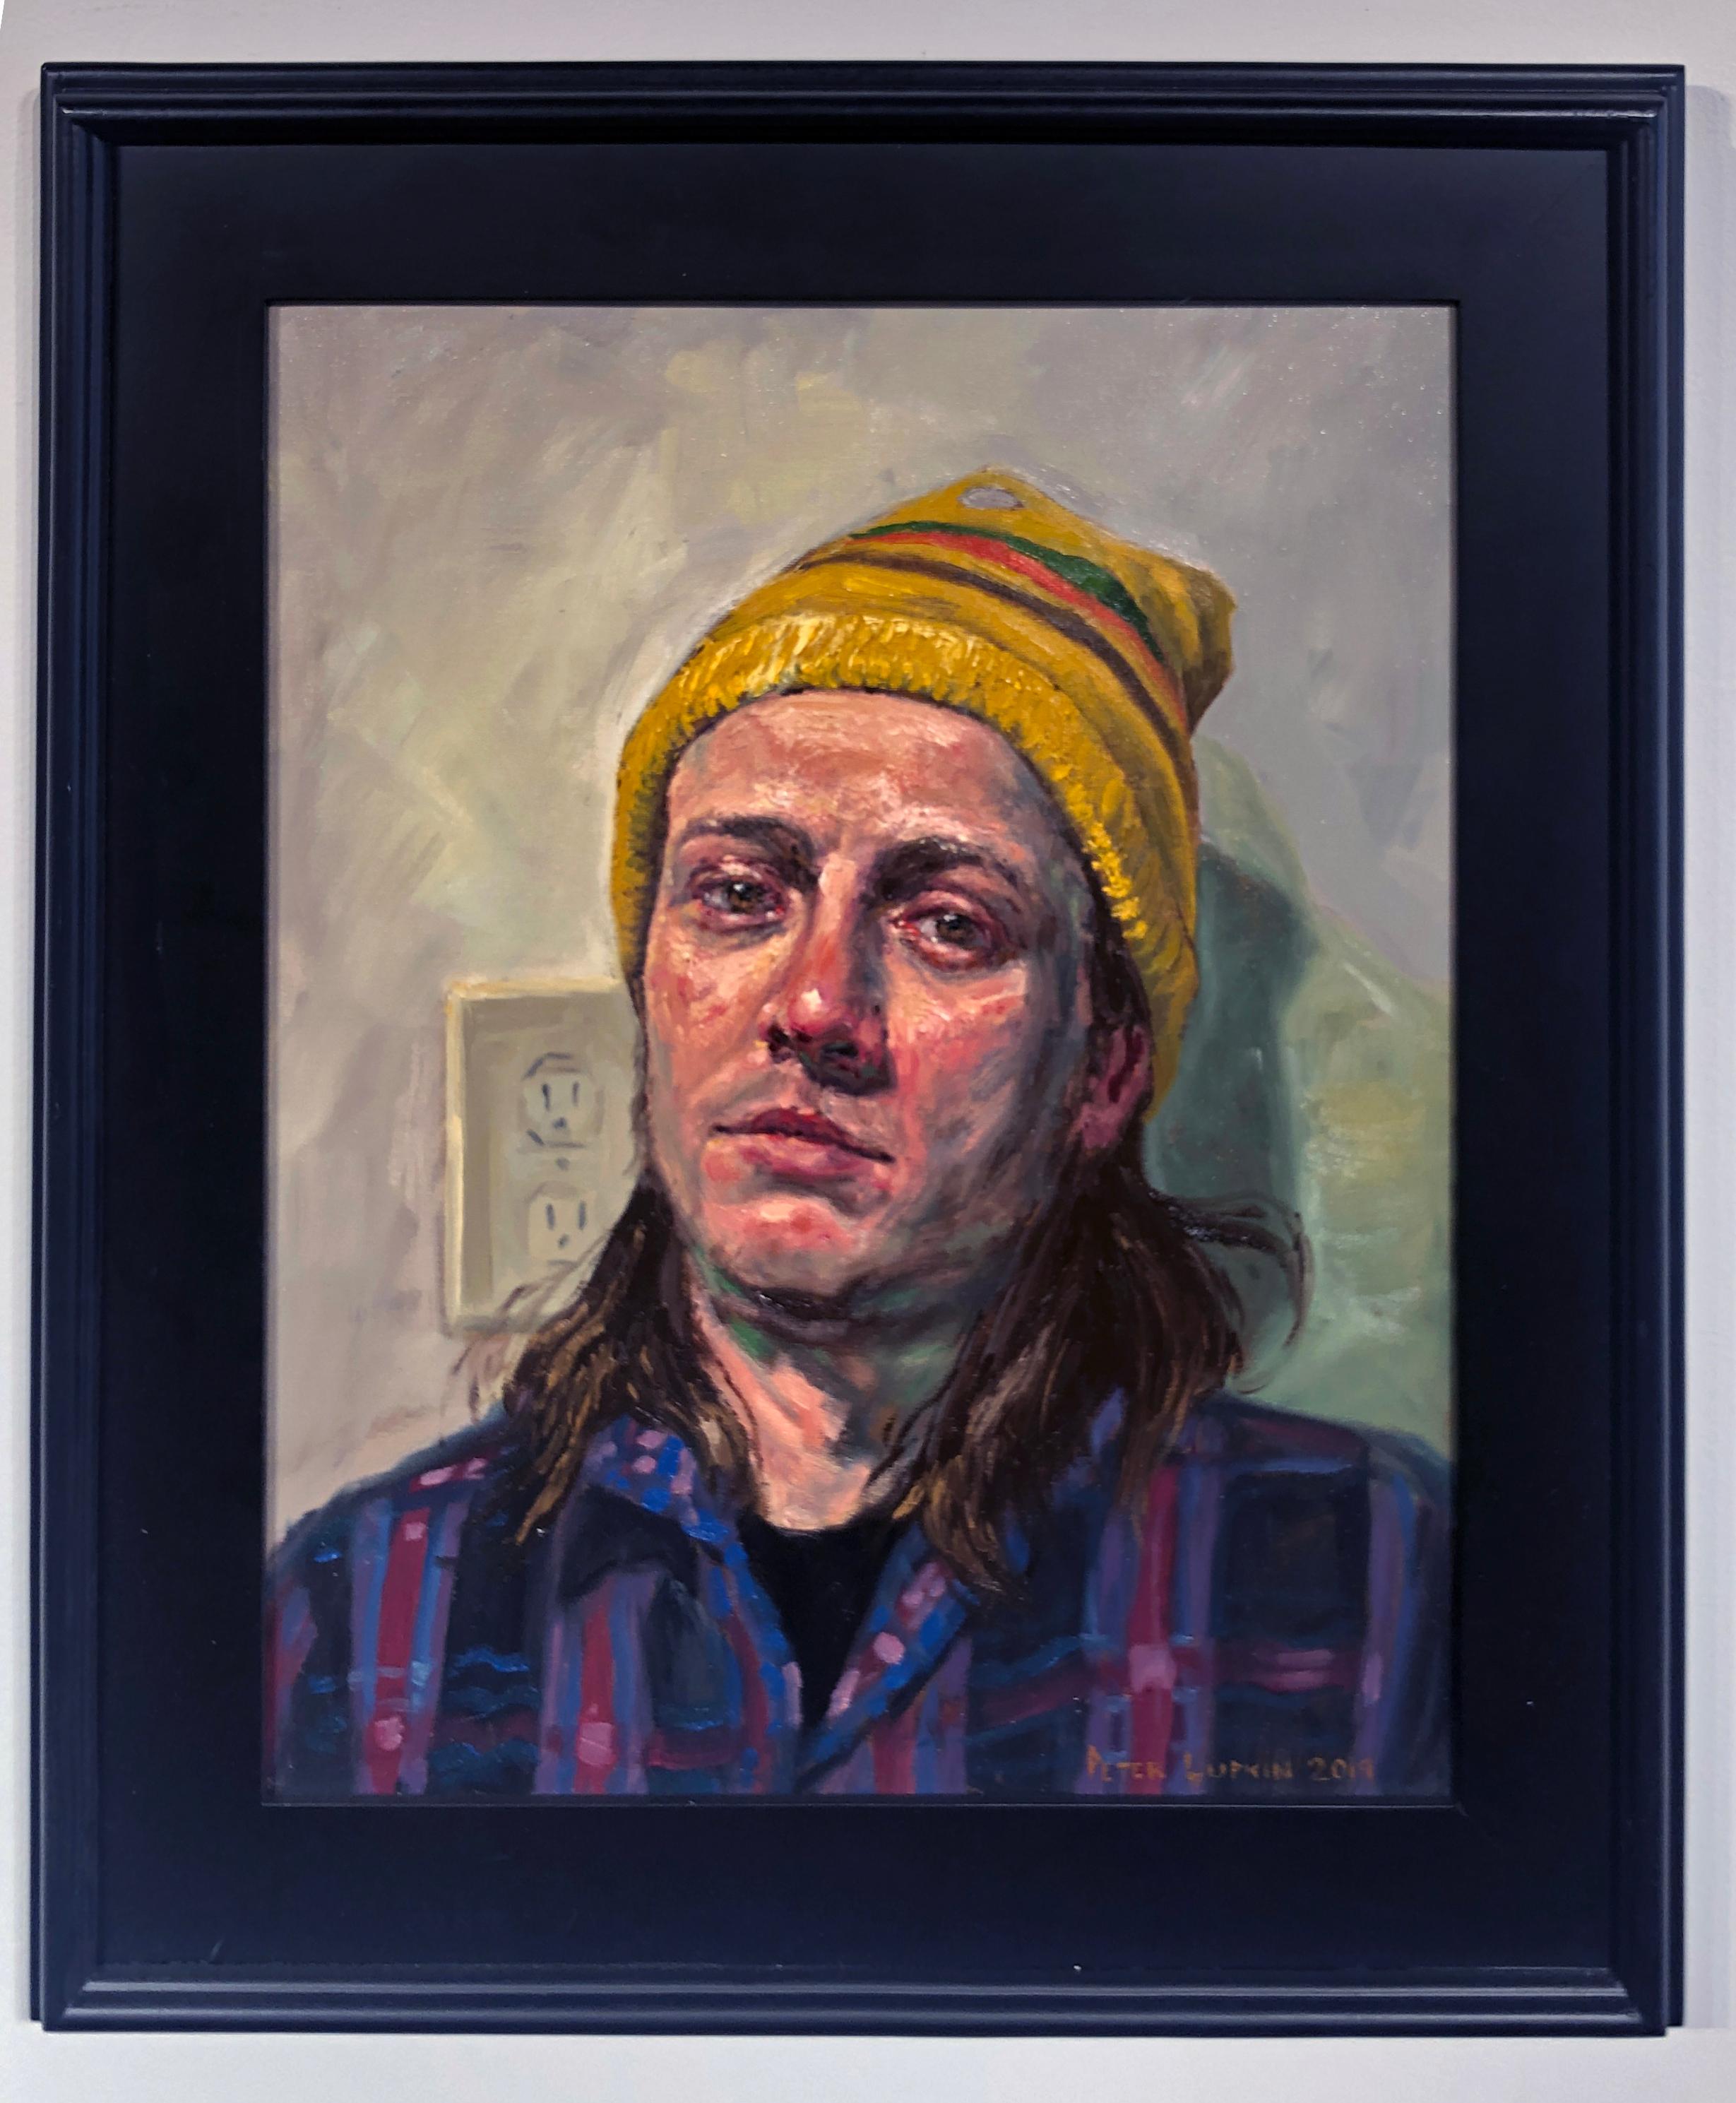 Hamburger Hat, Portrait of a Guy Wearing a Purple Shirt and Yellow Hat, framed - Painting by Peter Lupkin